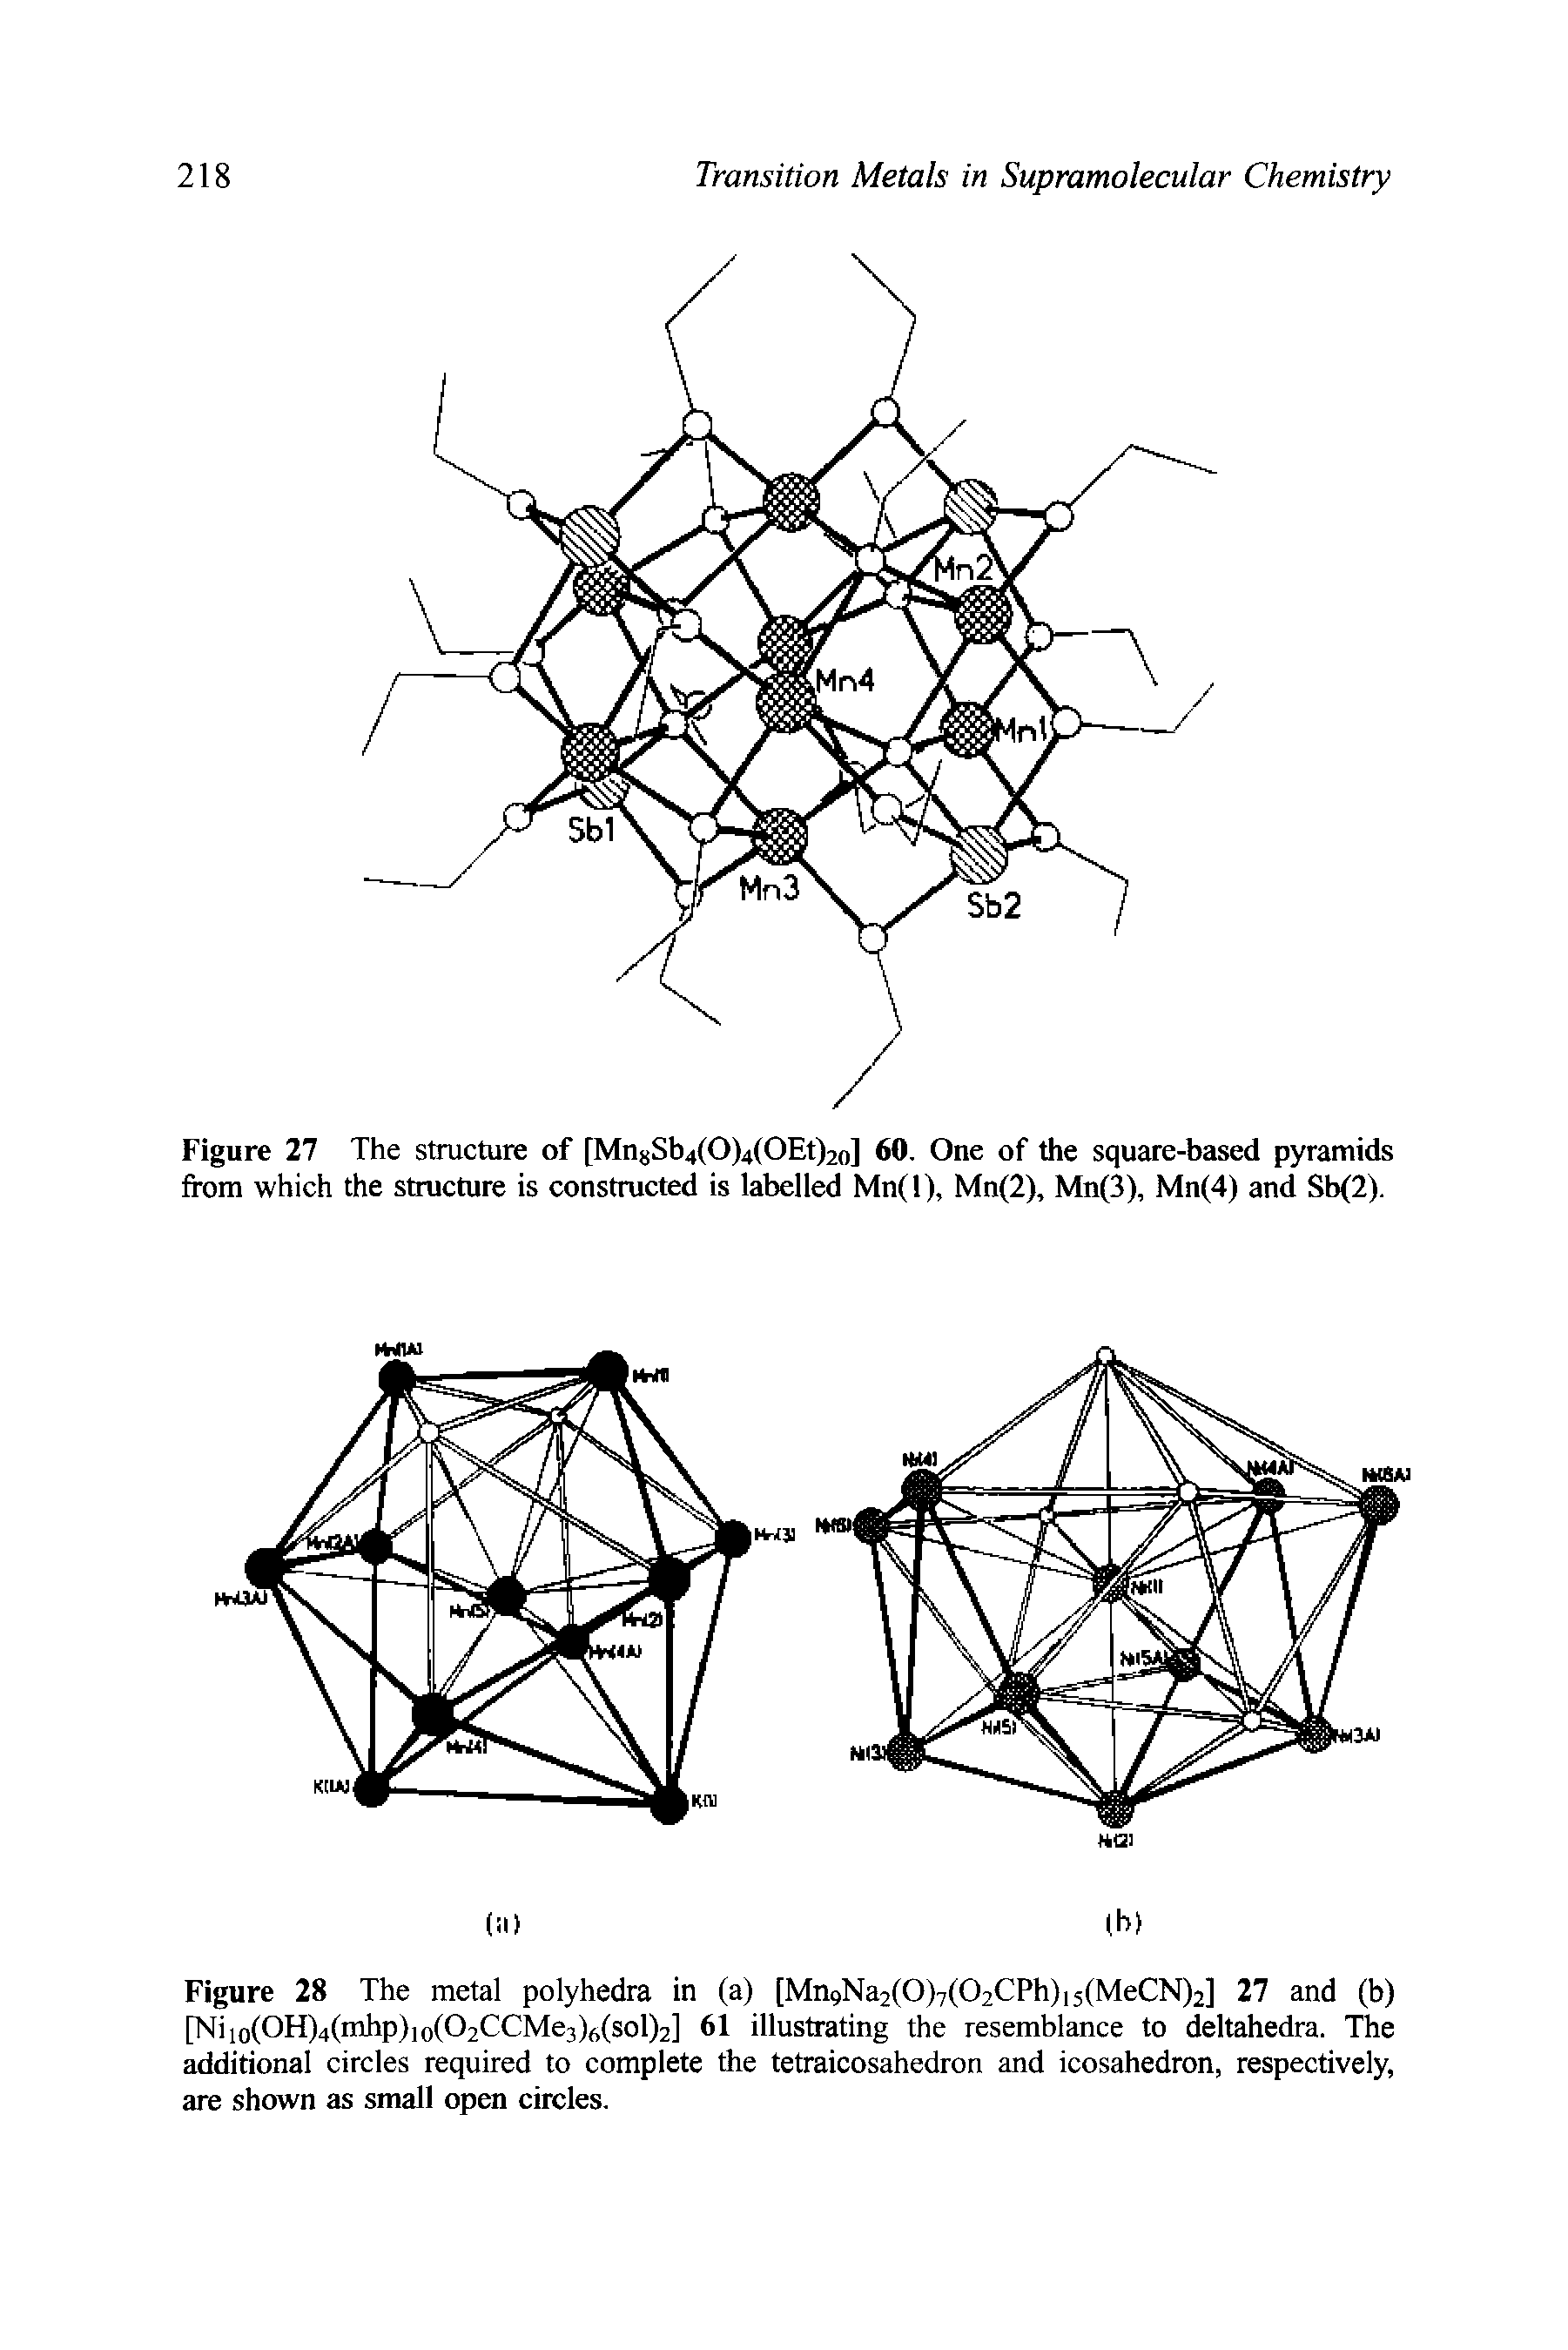 Figure 28 The metal polyhedra in (a) [Mri9Na2(0)7(02CPh)i5(MeCN)2] 27 and (b) [Niio(OH)4(mhp)io(02CCMe3)6(sol)2] 61 illustrating the resemblance to deltahedra. The additional circles required to complete the tetraicosahedron and icosahedron, respectively, are shown as small open circles.